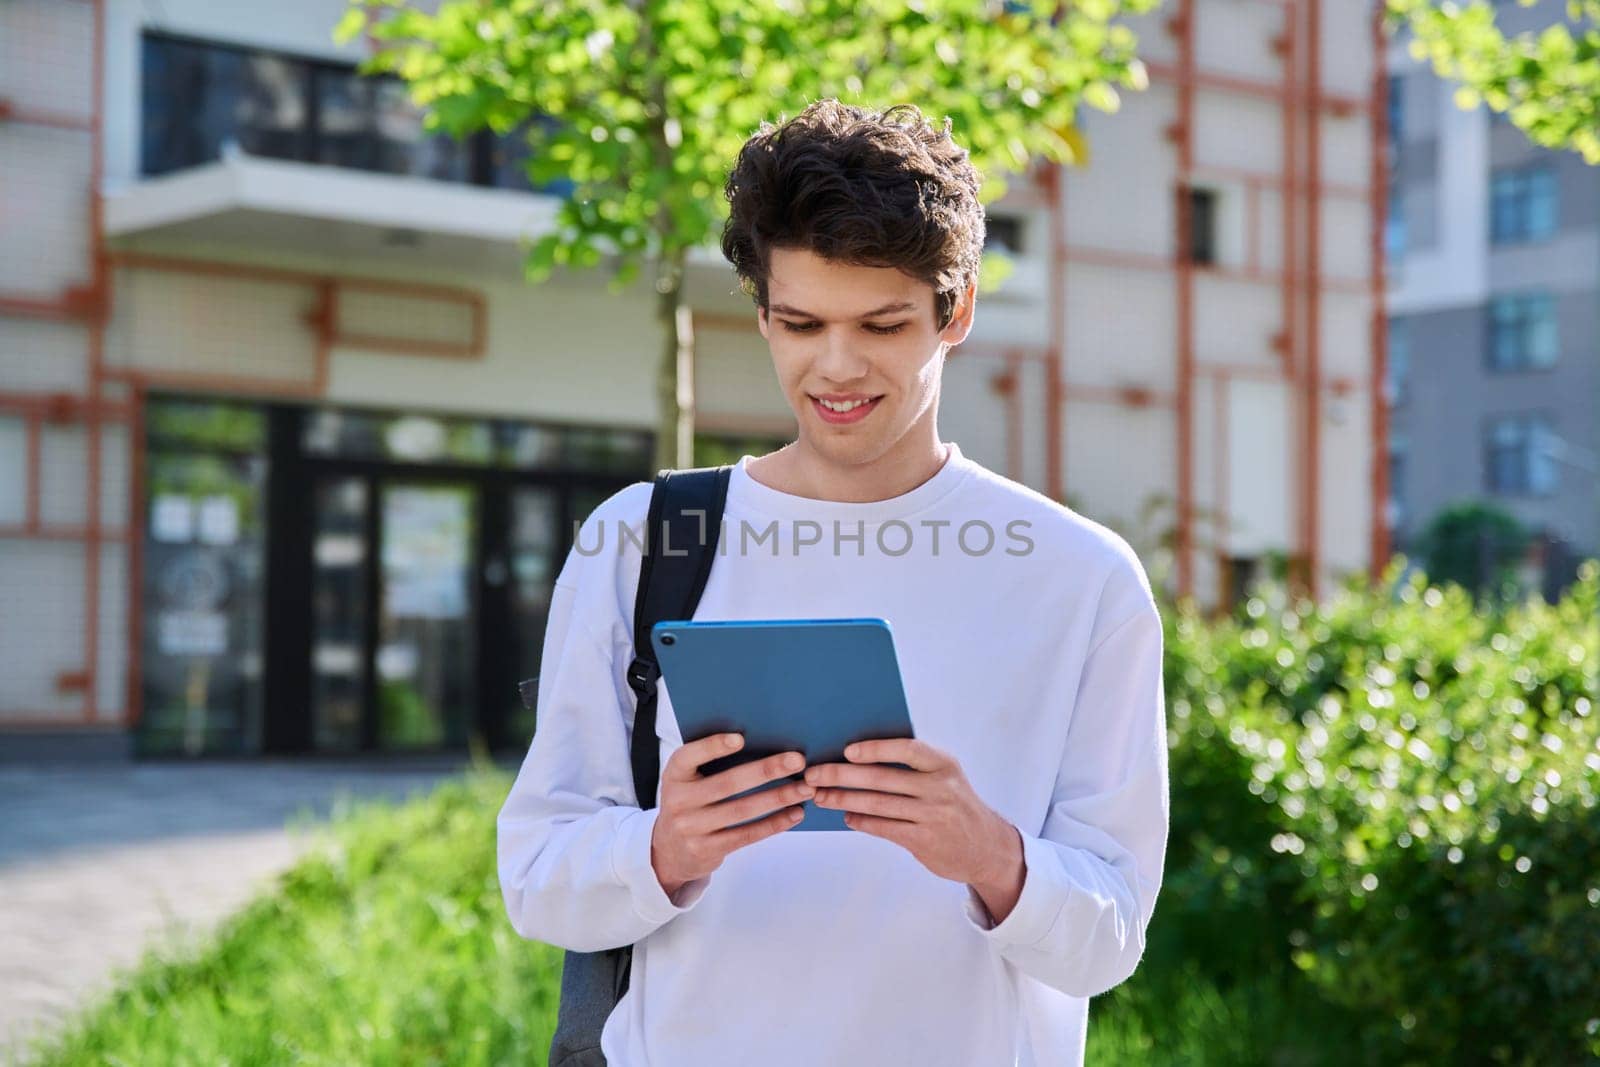 Young handsome guy college student using digital tablet outdoor, educational building background. Education, technology, training, 19,20 years age youth concept